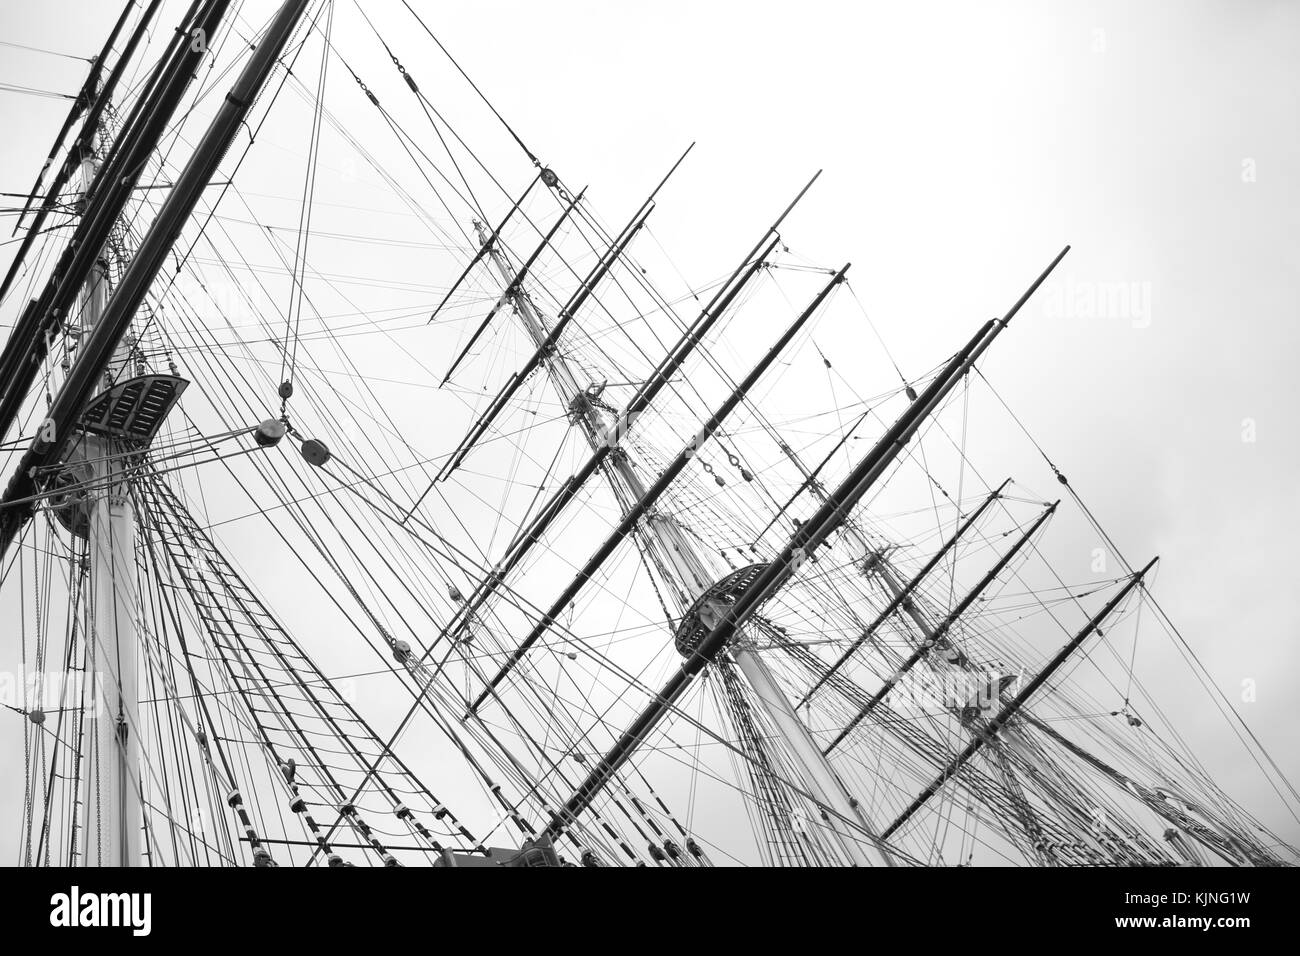 The Cutty Sark in Greenwich. The very last surviving extreme clipper in the world. Stock Photo